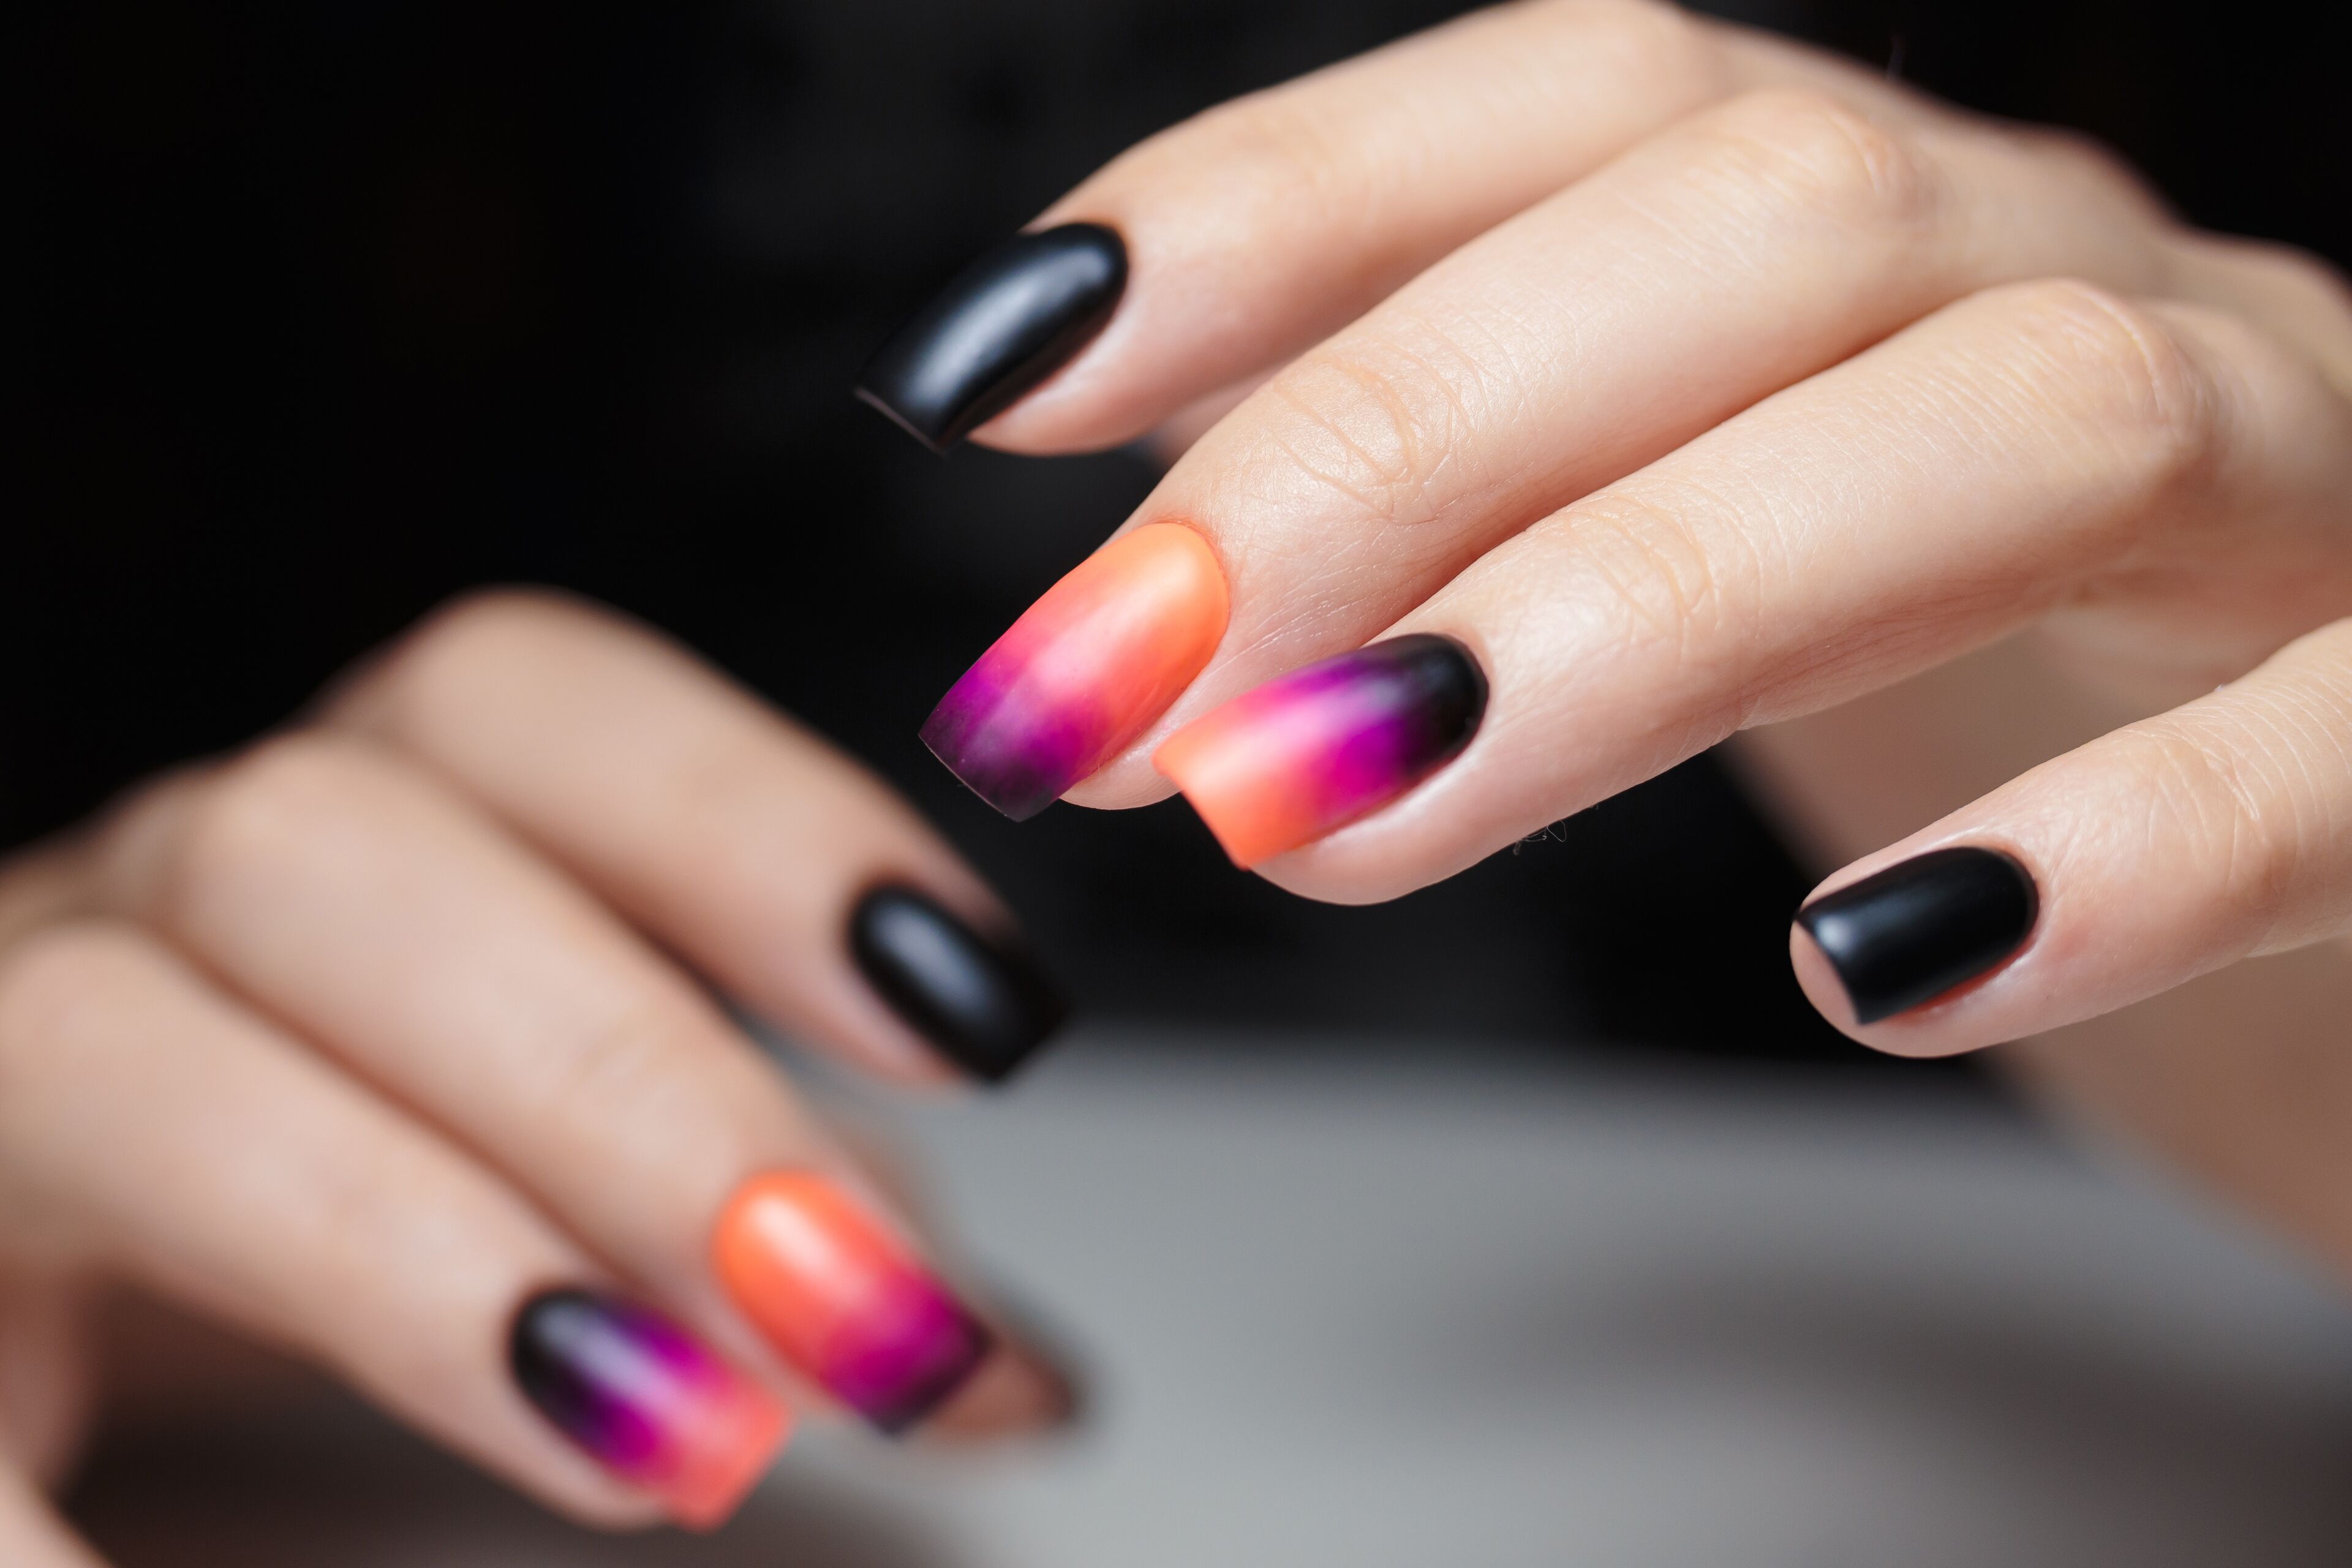 Close-up of a hand with nails painted in a black-to-vibrant gradient design.